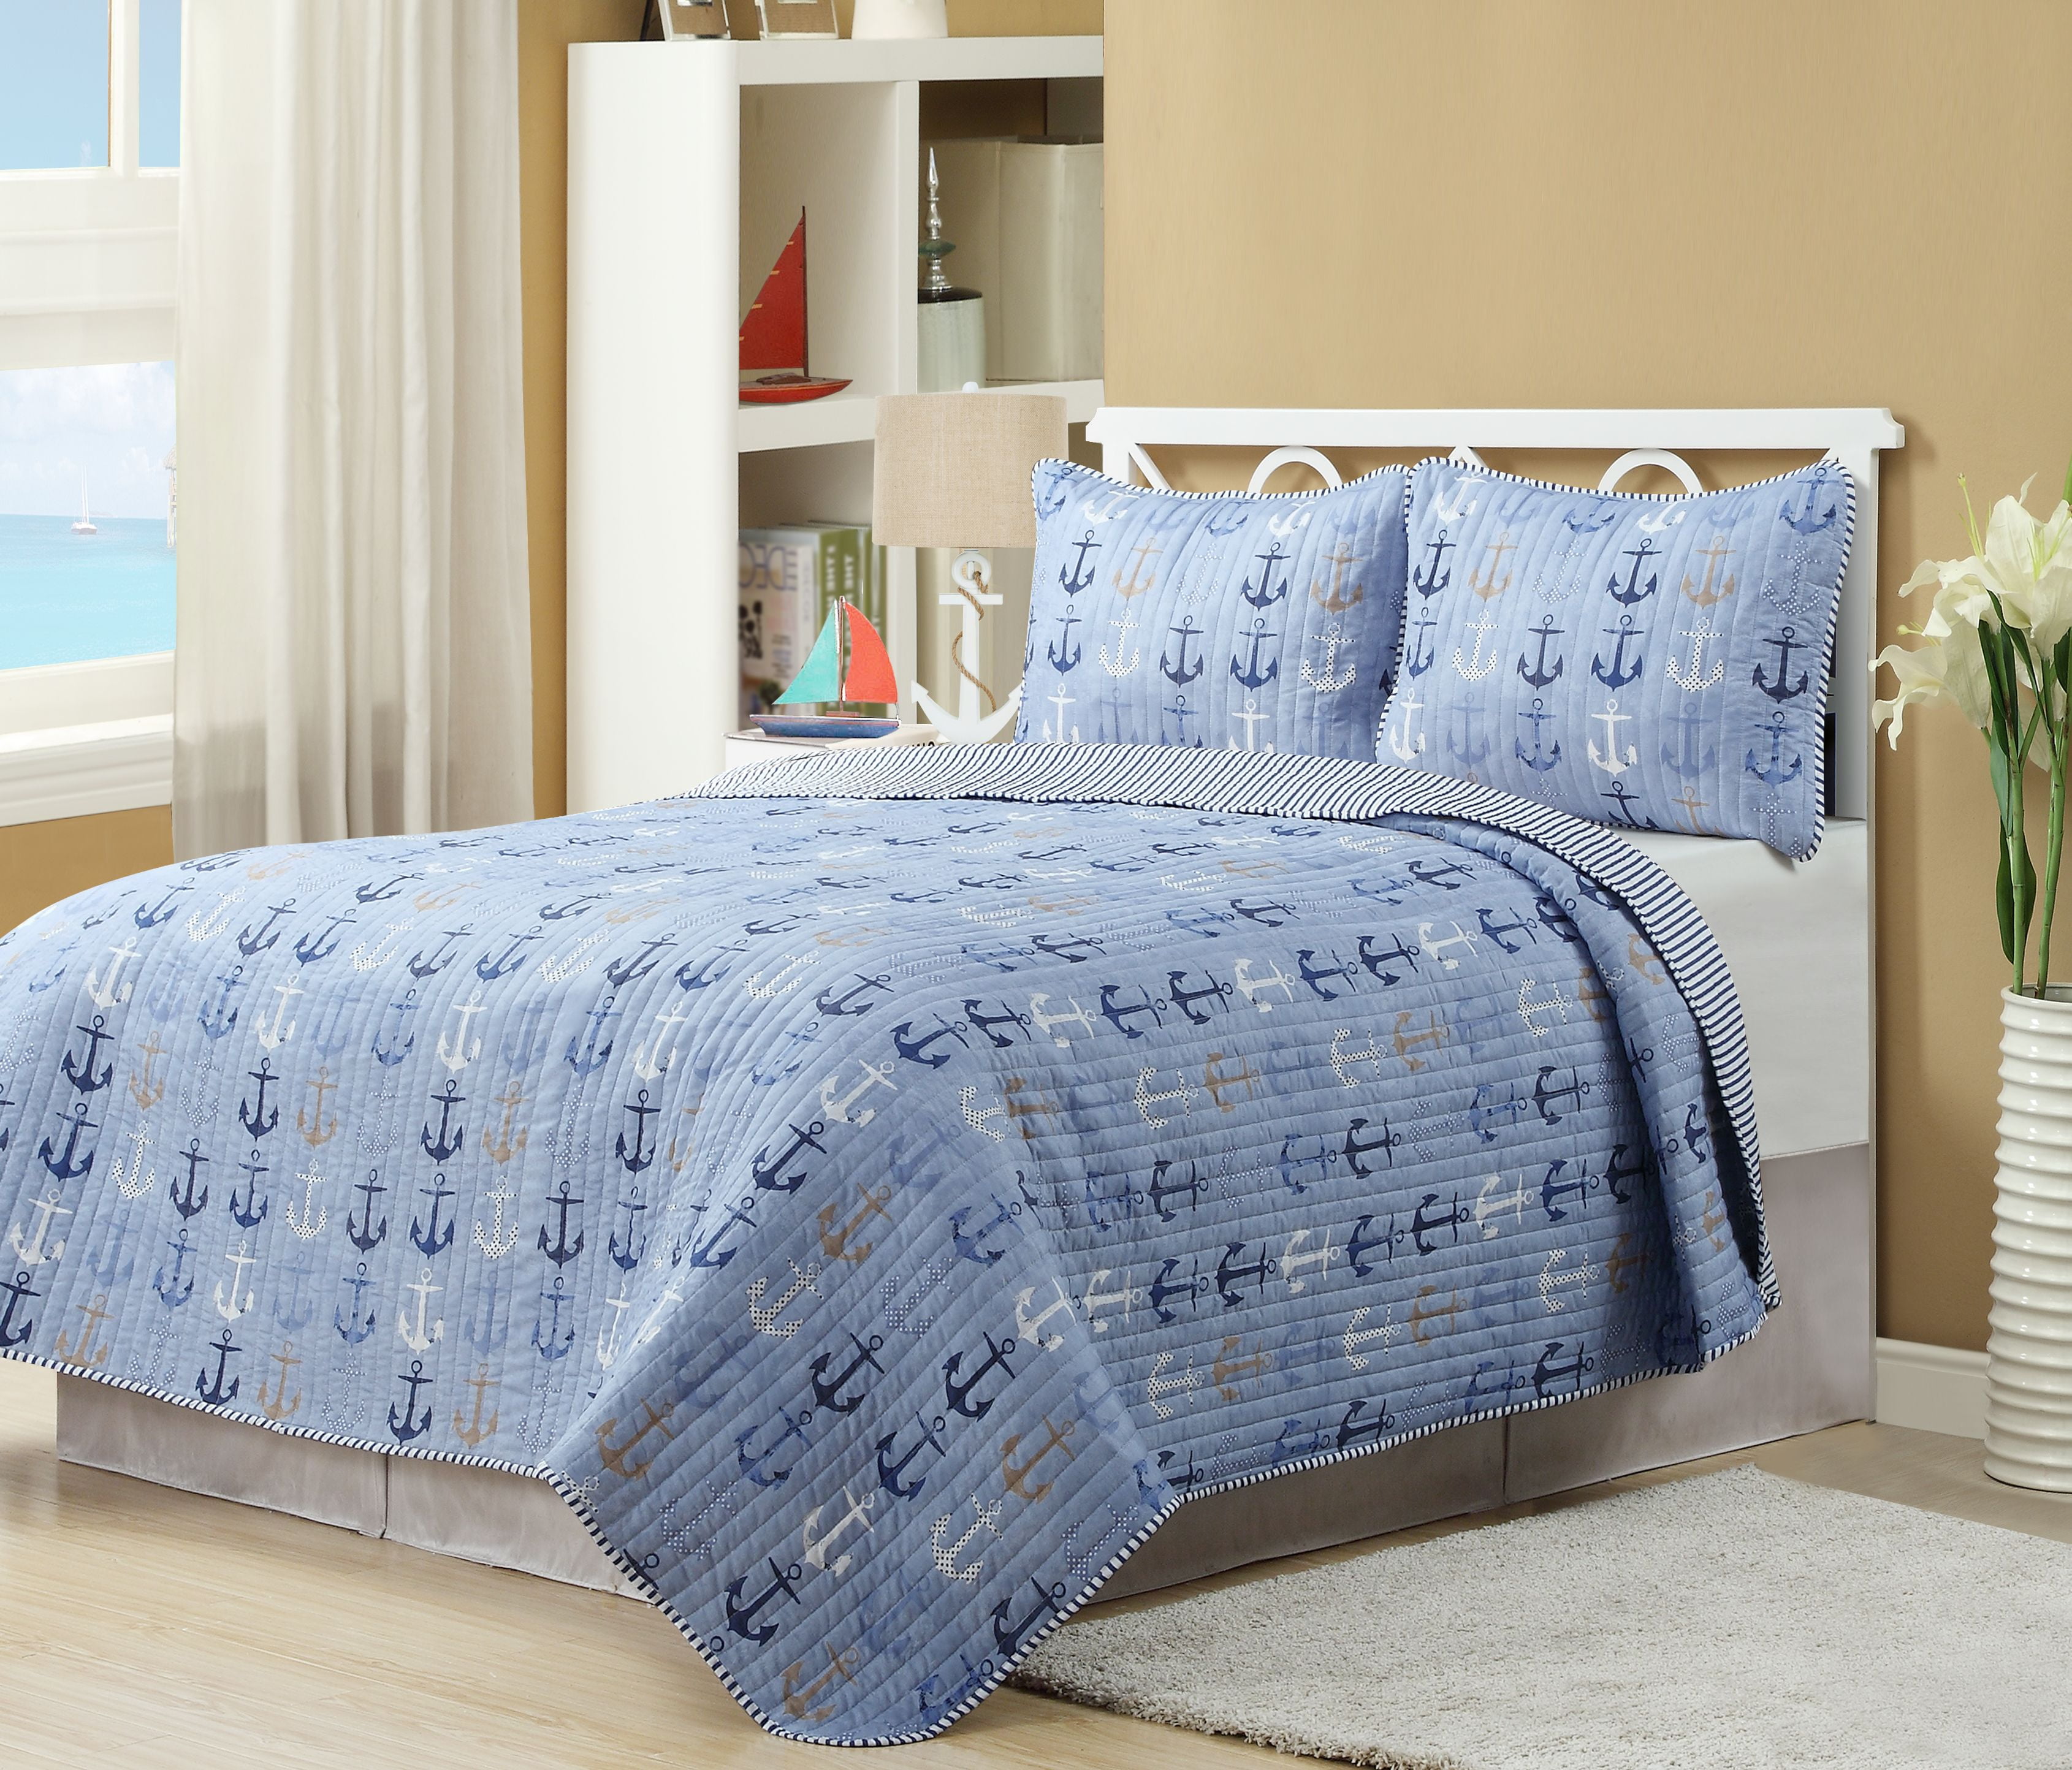 Details about   NEW ~ COZY LODGE GREY BLUE NAVY RED WHITE PLAID SPORTS NAUTICAL COMFORTER SET 